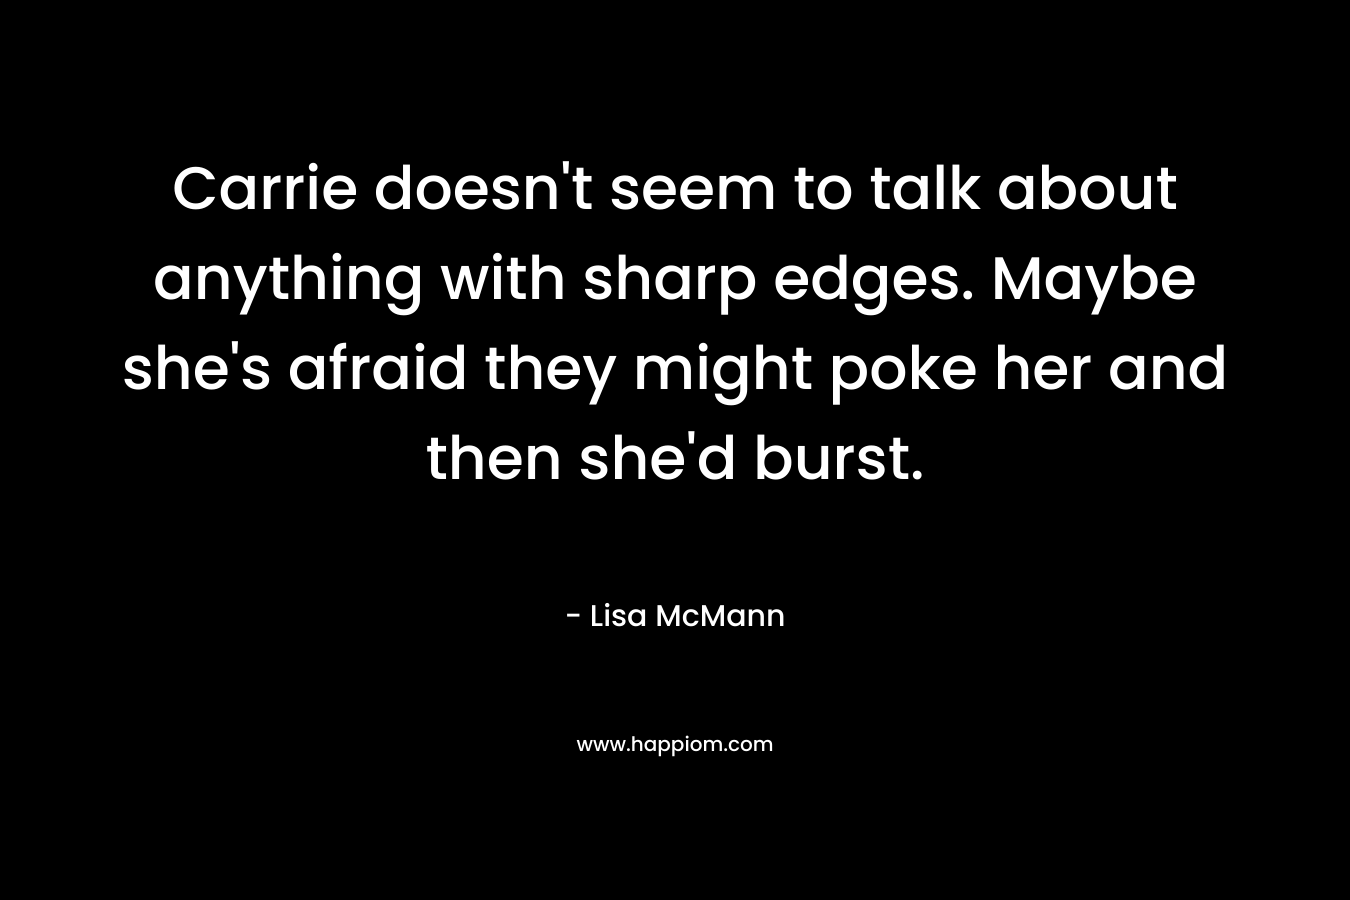 Carrie doesn’t seem to talk about anything with sharp edges. Maybe she’s afraid they might poke her and then she’d burst. – Lisa McMann